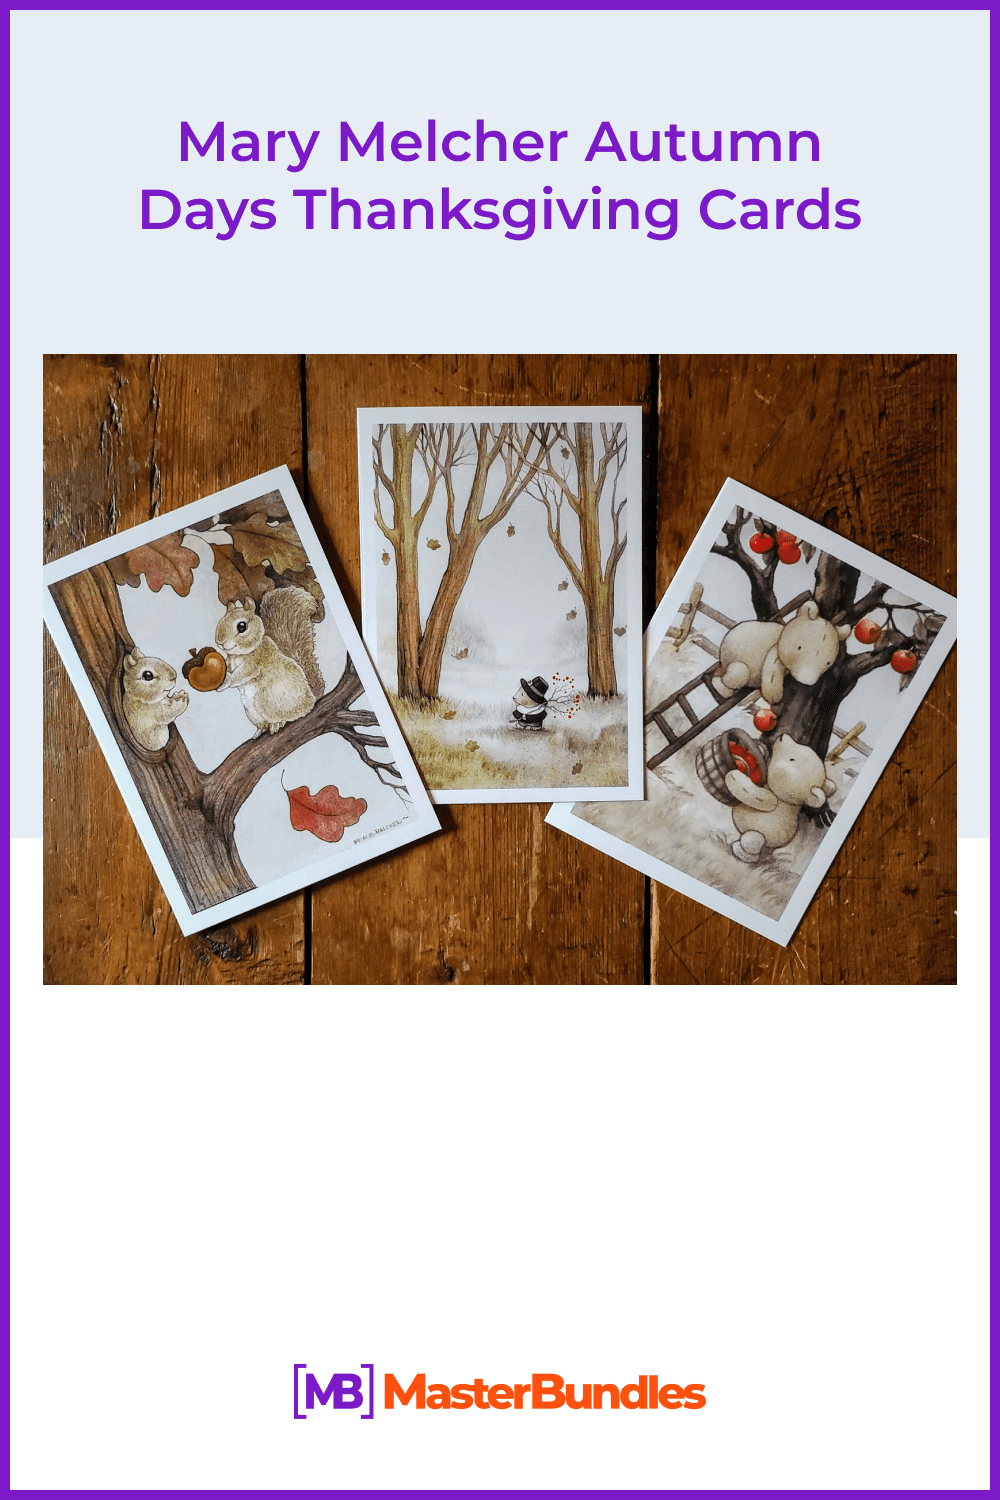 Mary Melcher autumn days thanksgiving cards.